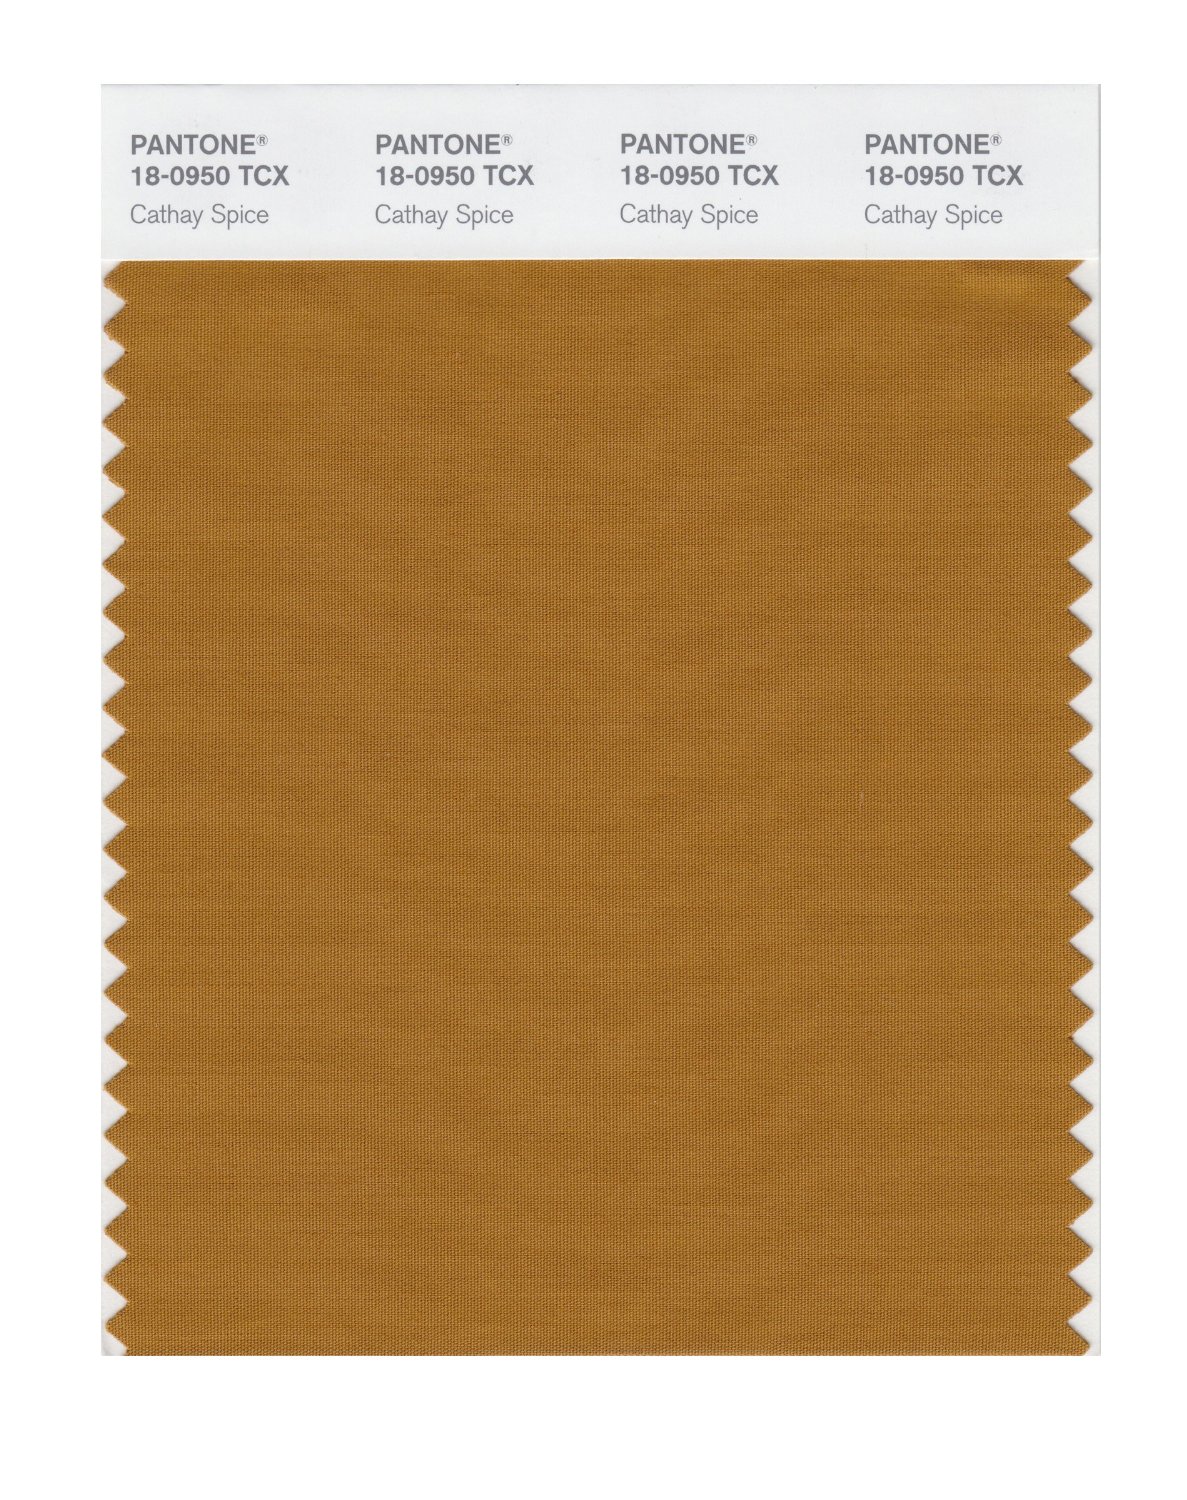 Pantone Cotton Swatch 18-0950 Cathay Spice